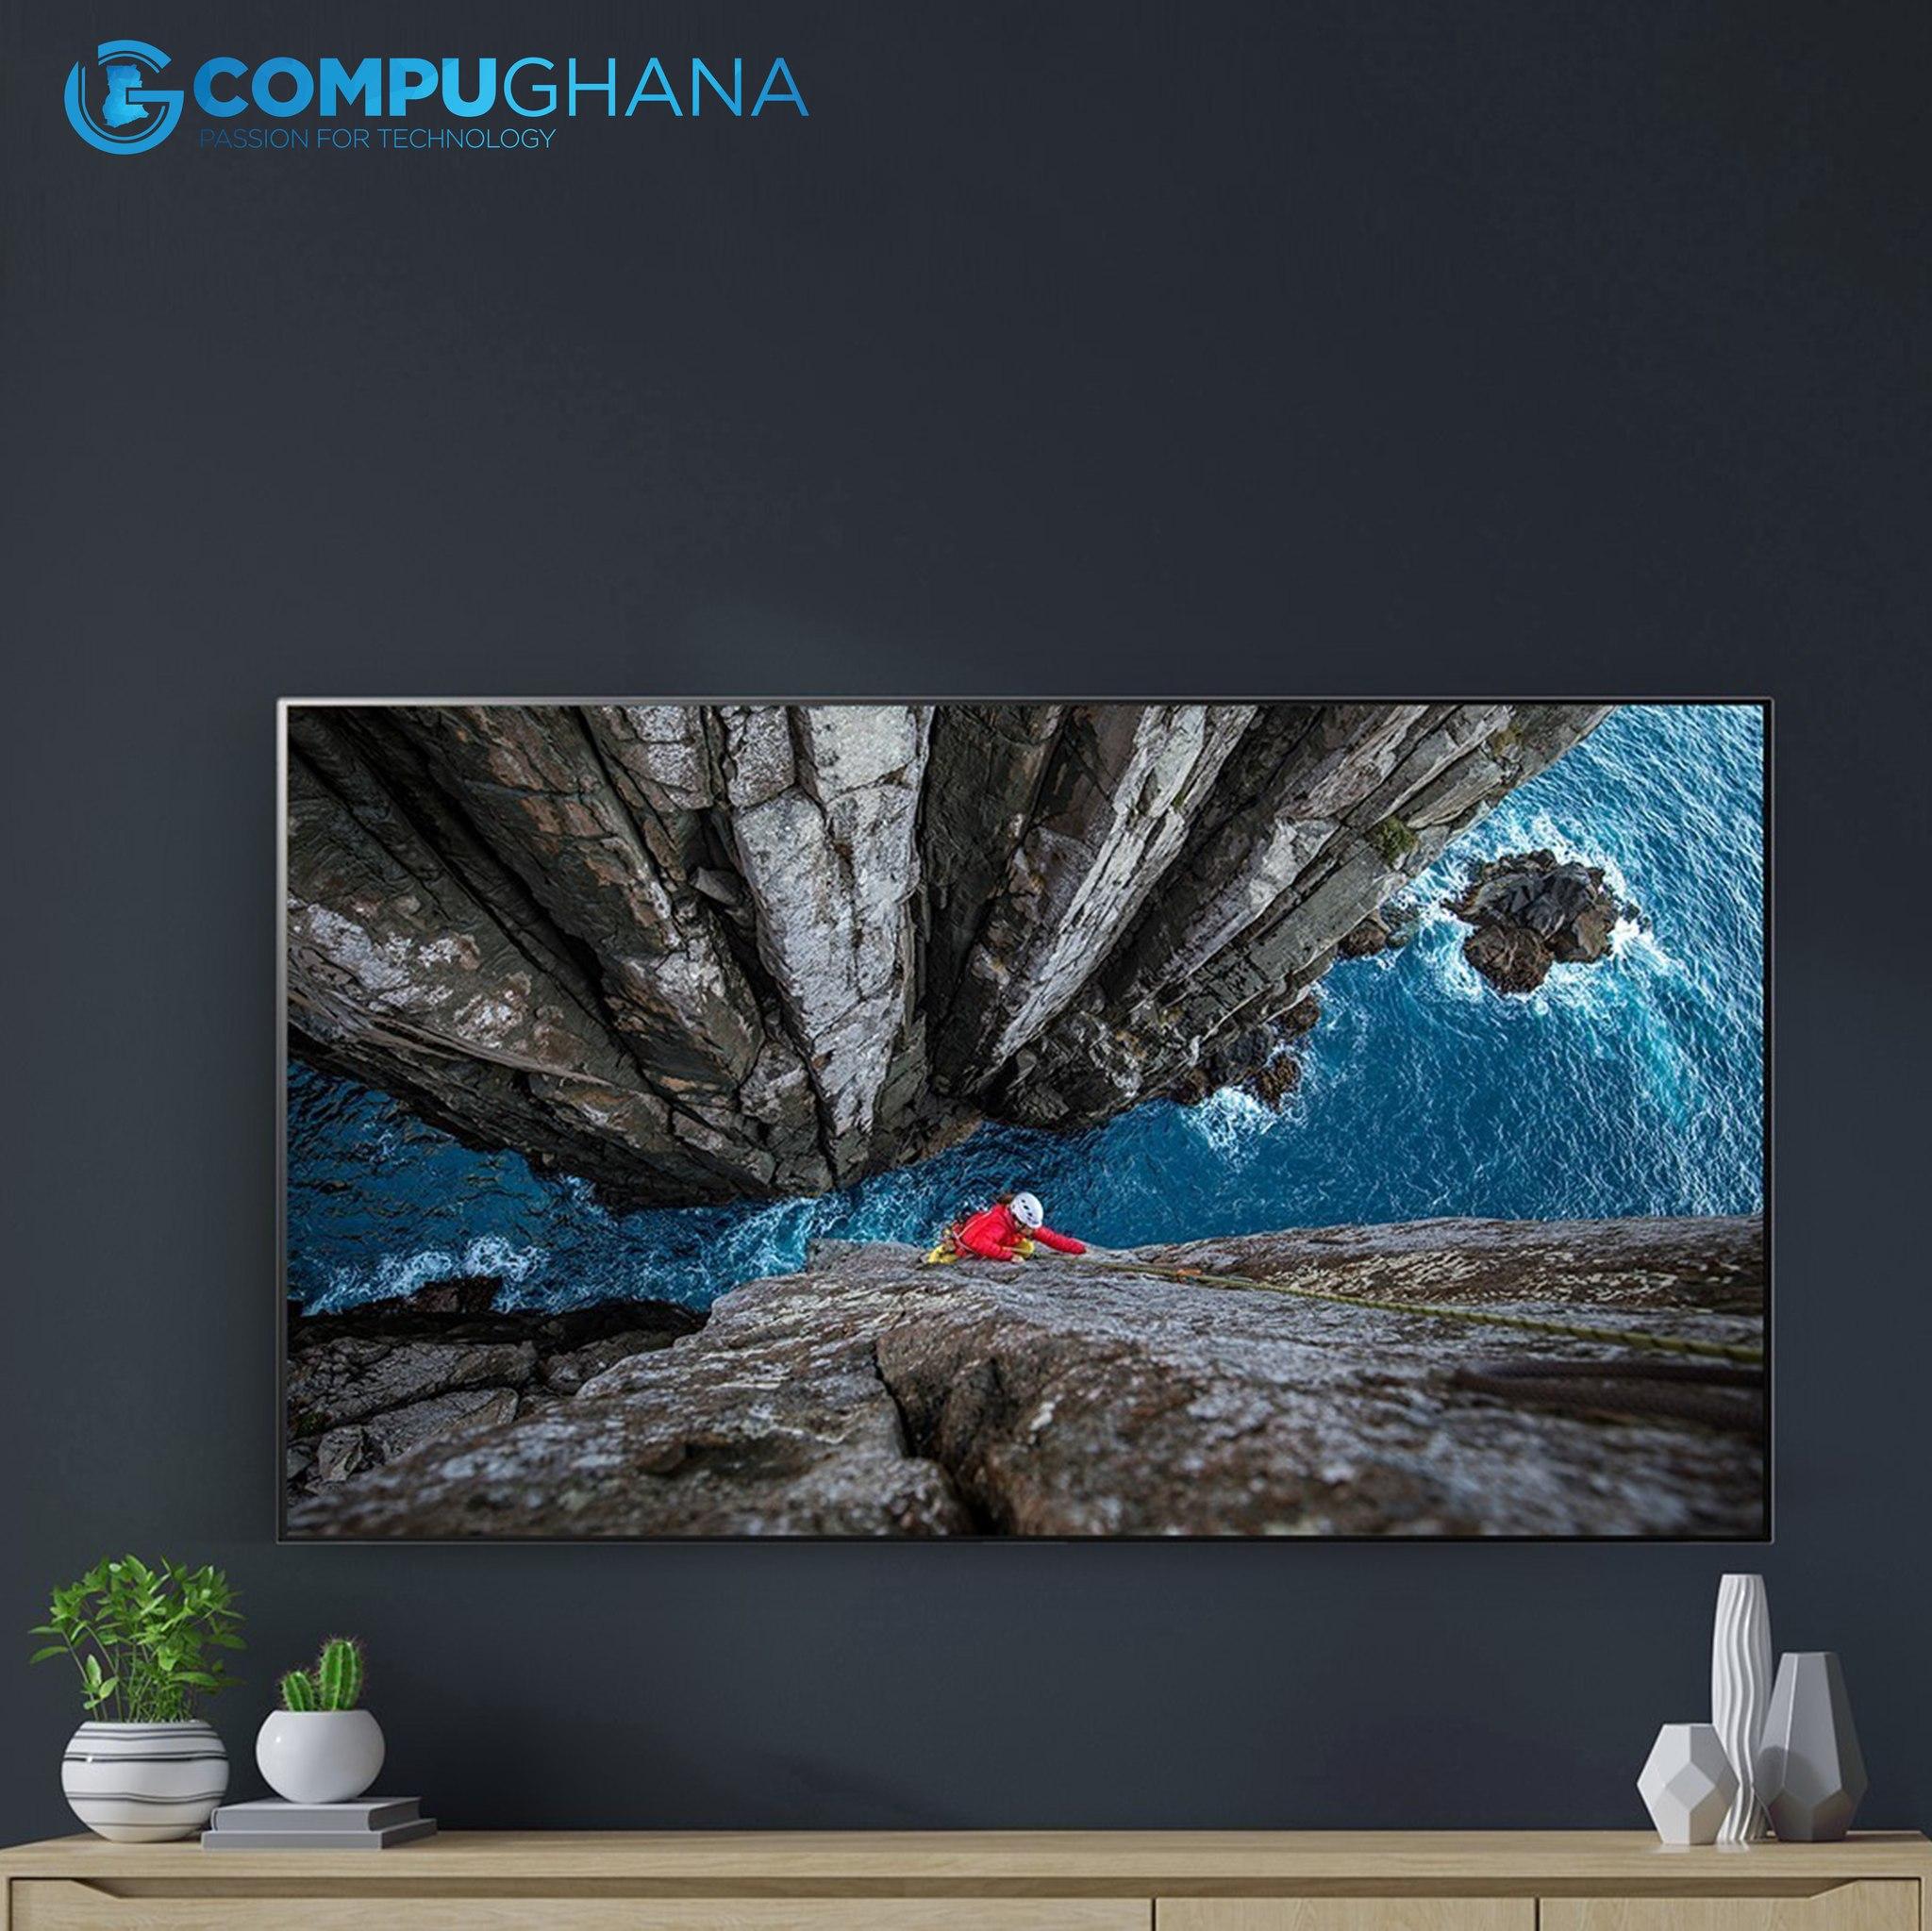 Pughana Oled Tvs Take Movies Tv Shows And Gaming To A